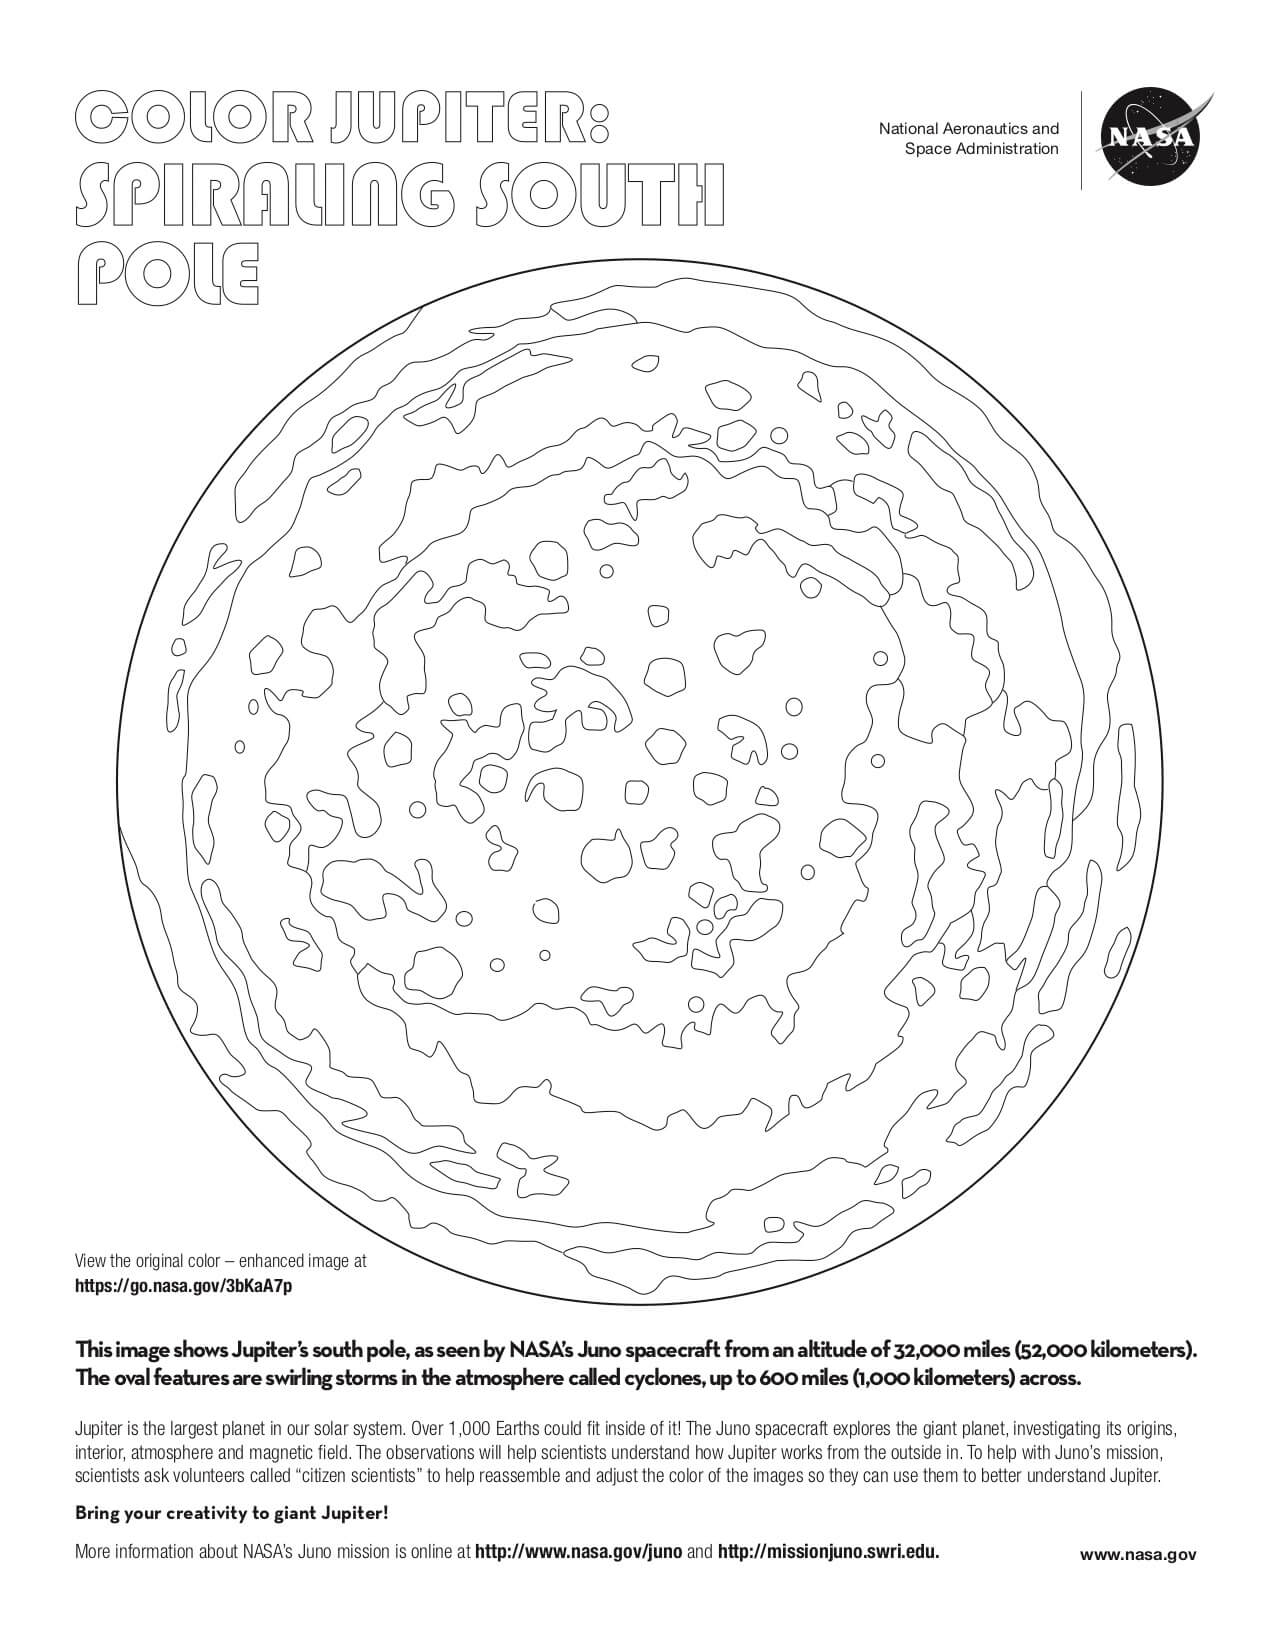 Coloring page for Jupiter's spiraling south pole.